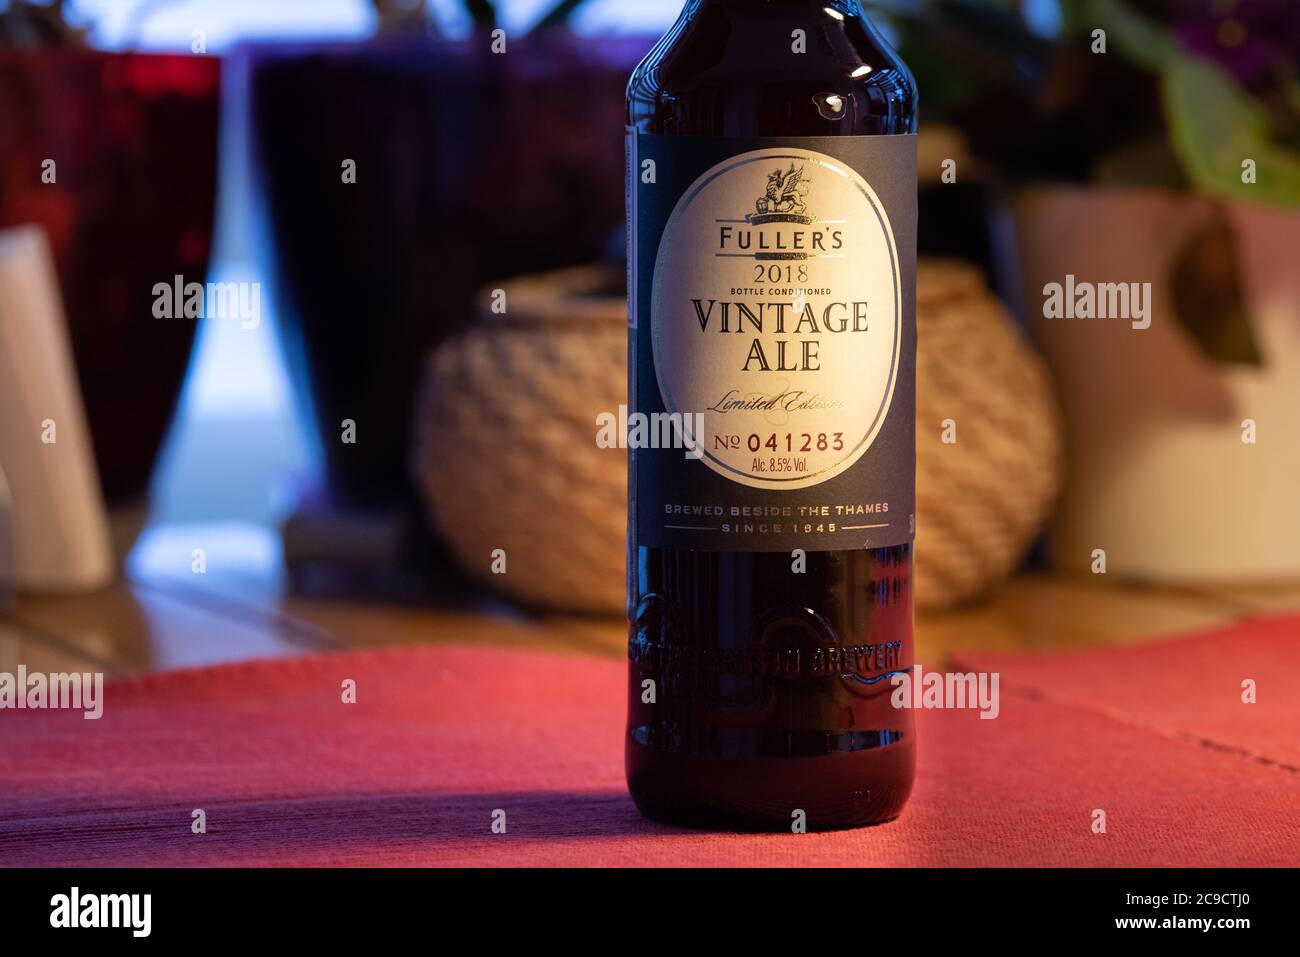 Ankara, TURKEY - January 1, 2020: A special beer by one of the most known British breweries, Fuller's Vintage Ale, is seeked all through the world. Stock Photo